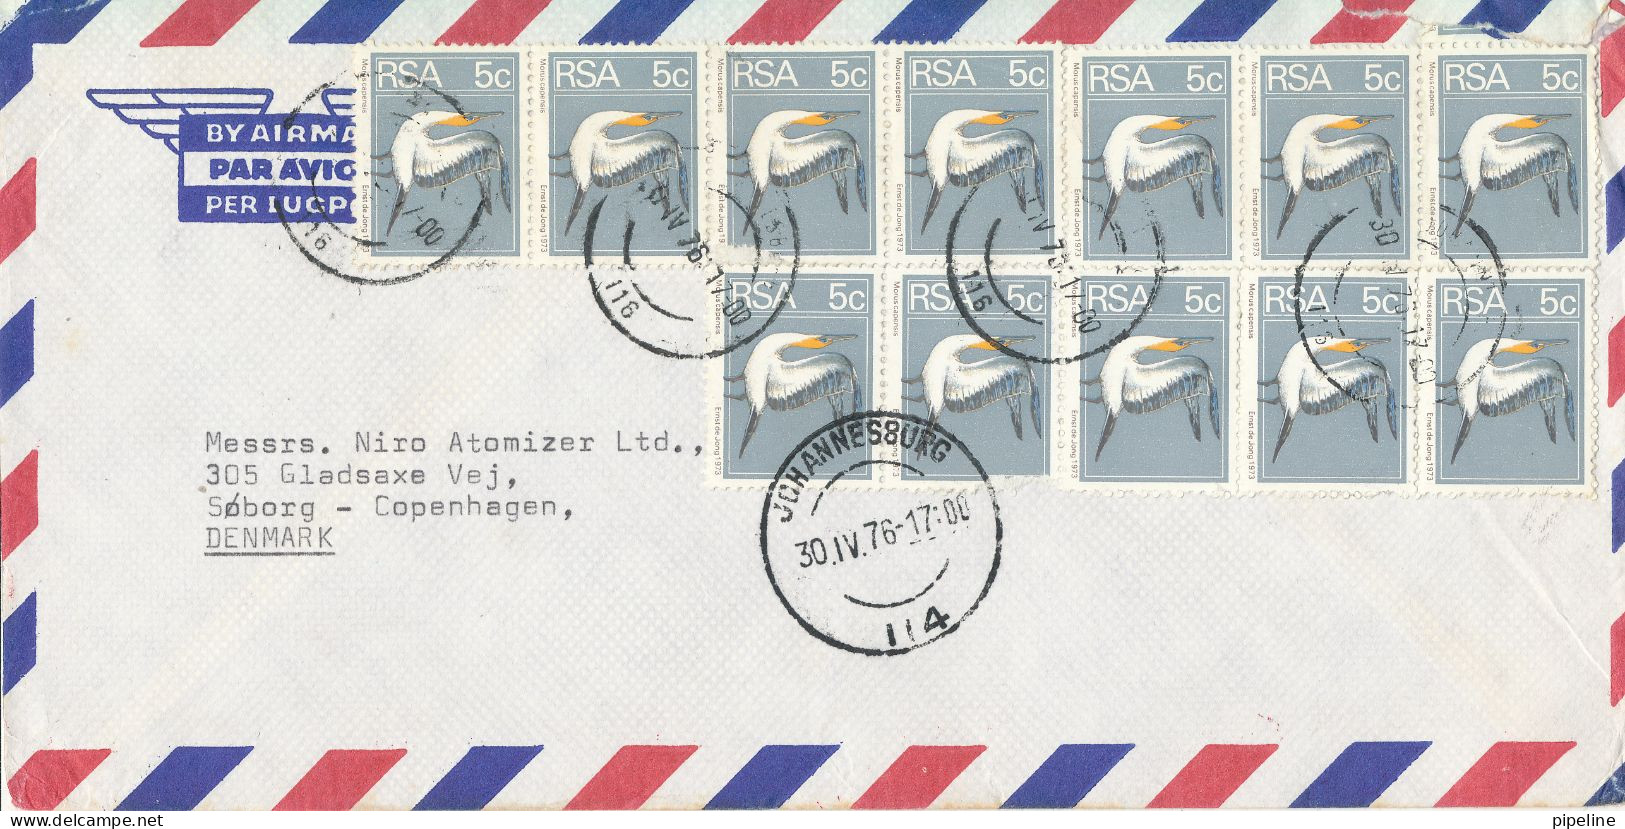 South Africa RSA Air Mail Cover Sent To Denmark 30-4-1976 With A Lot Of BIRD Stamps - Aéreo